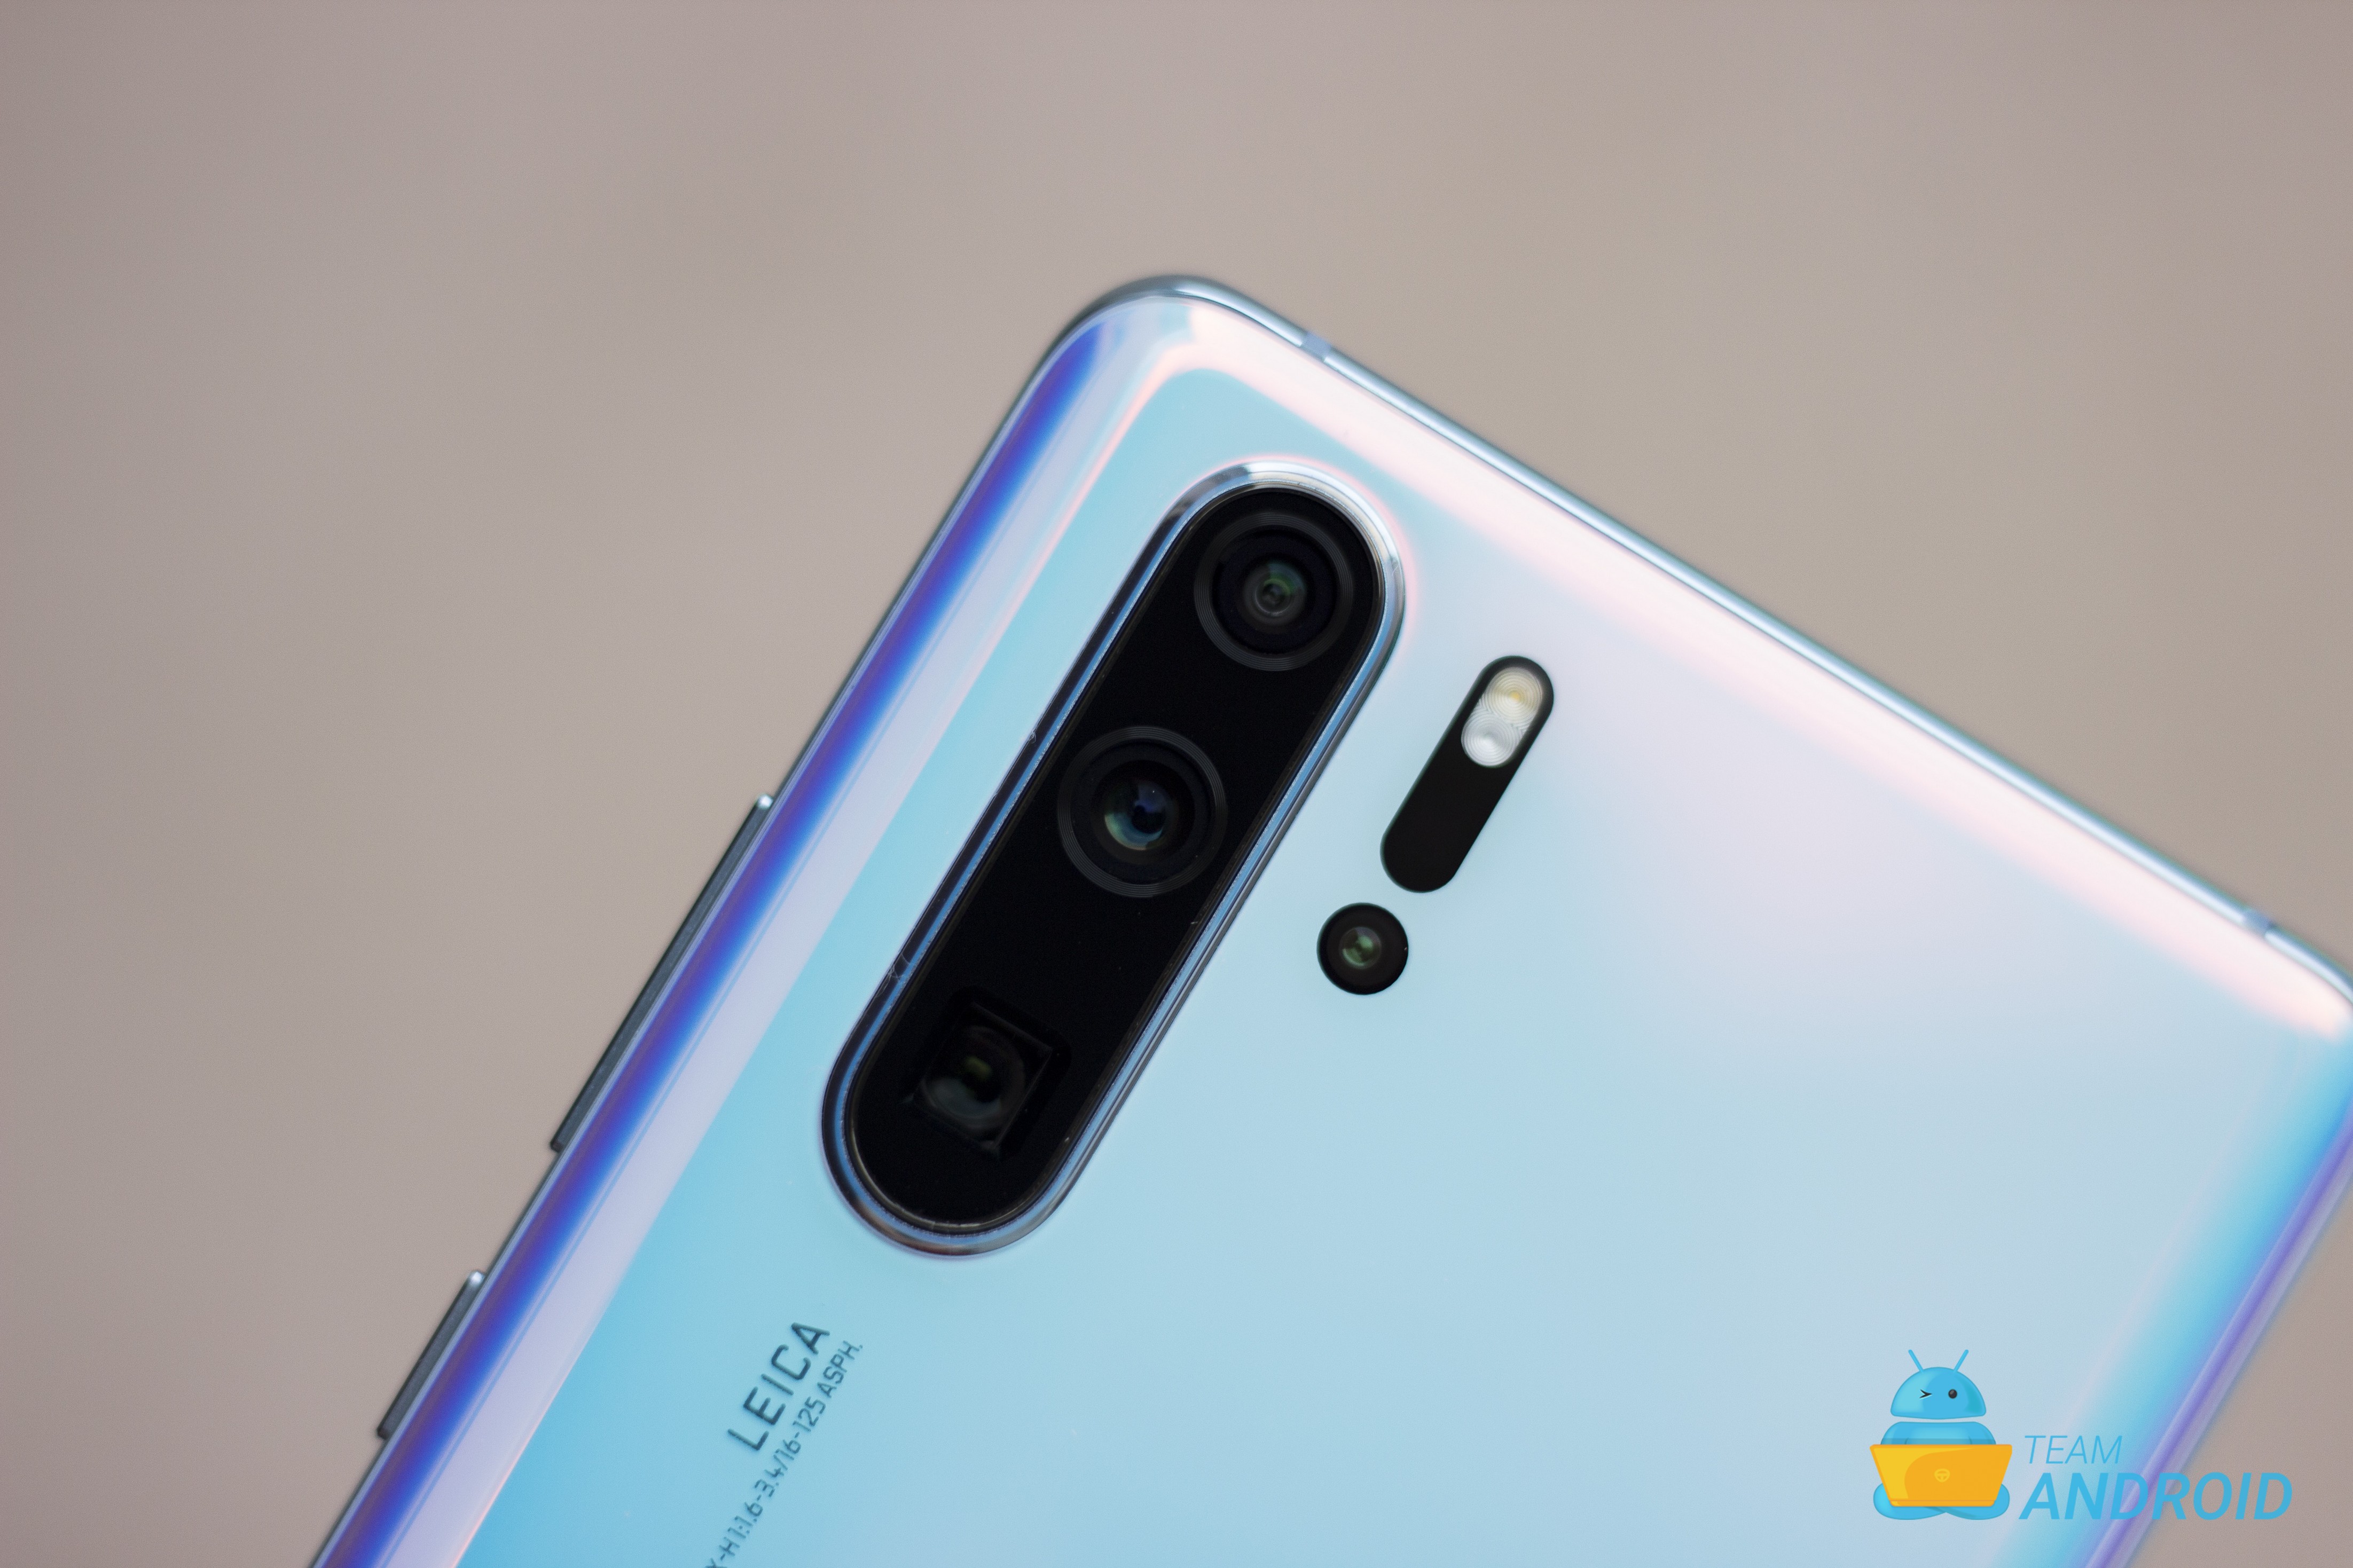 Huawei P30 Pro Review - Excellent Photography, Design and Performance to Match 59